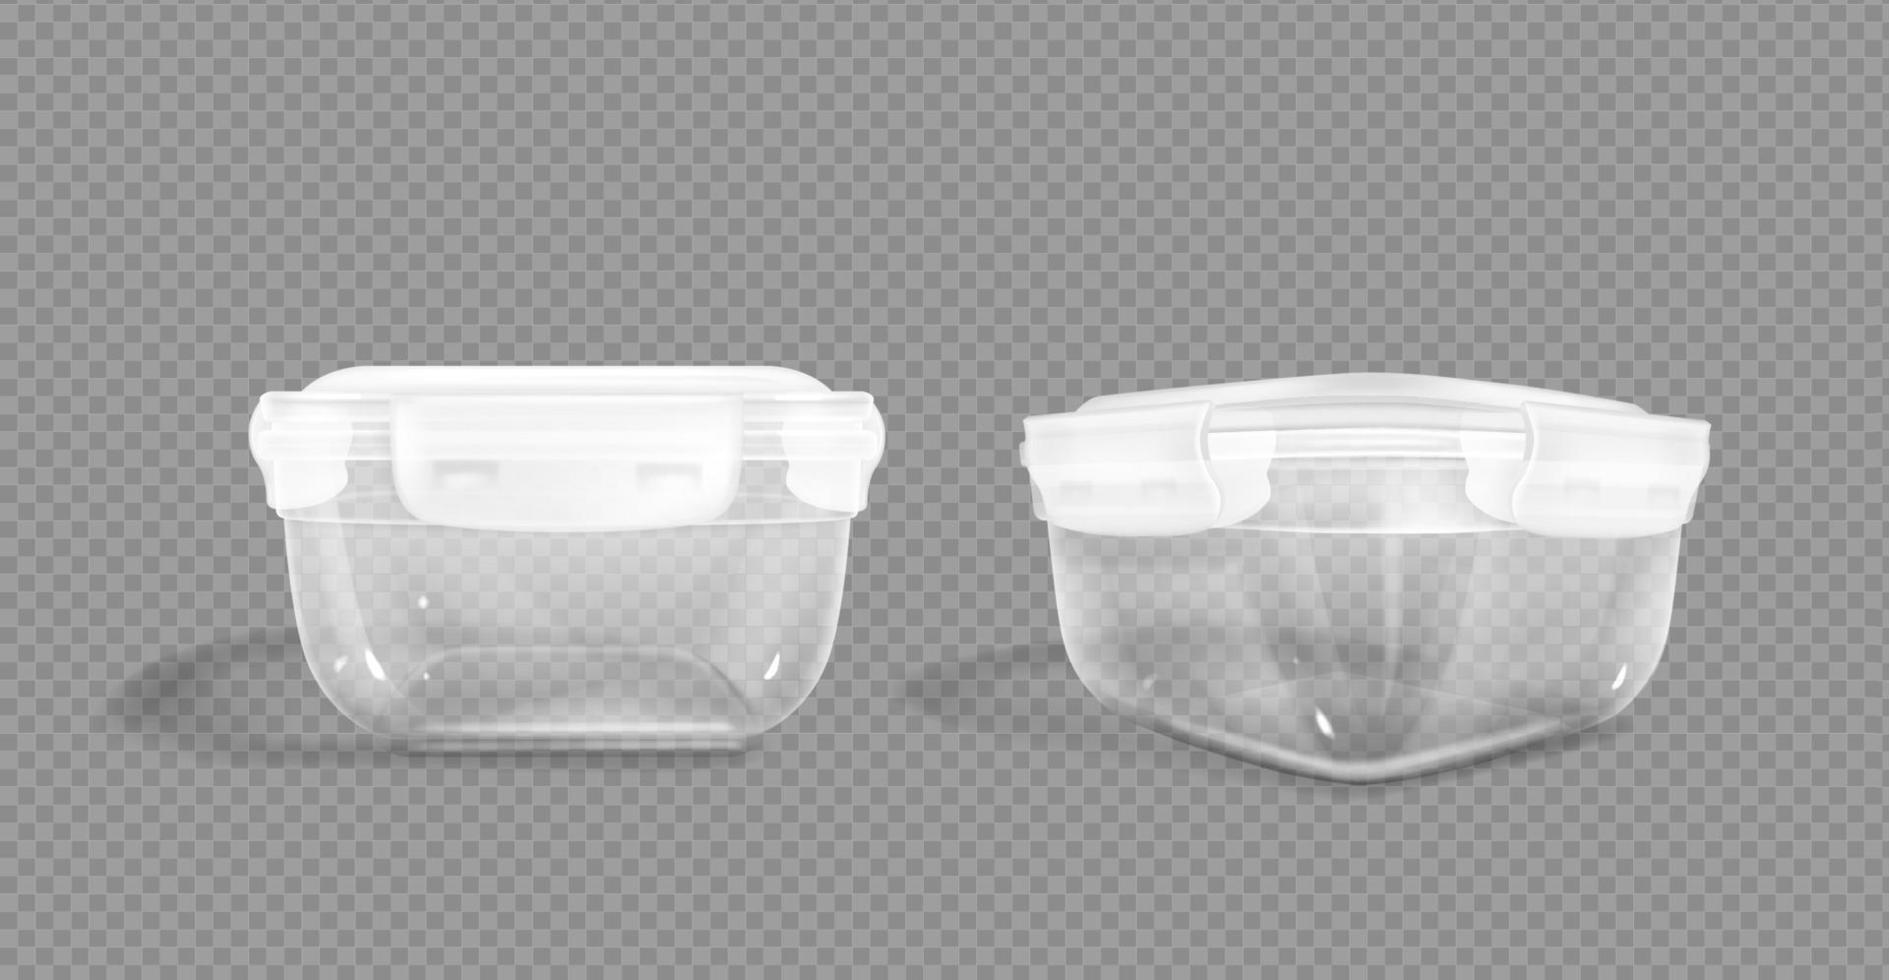 Plastic food containers clipping path, lock lids. vector